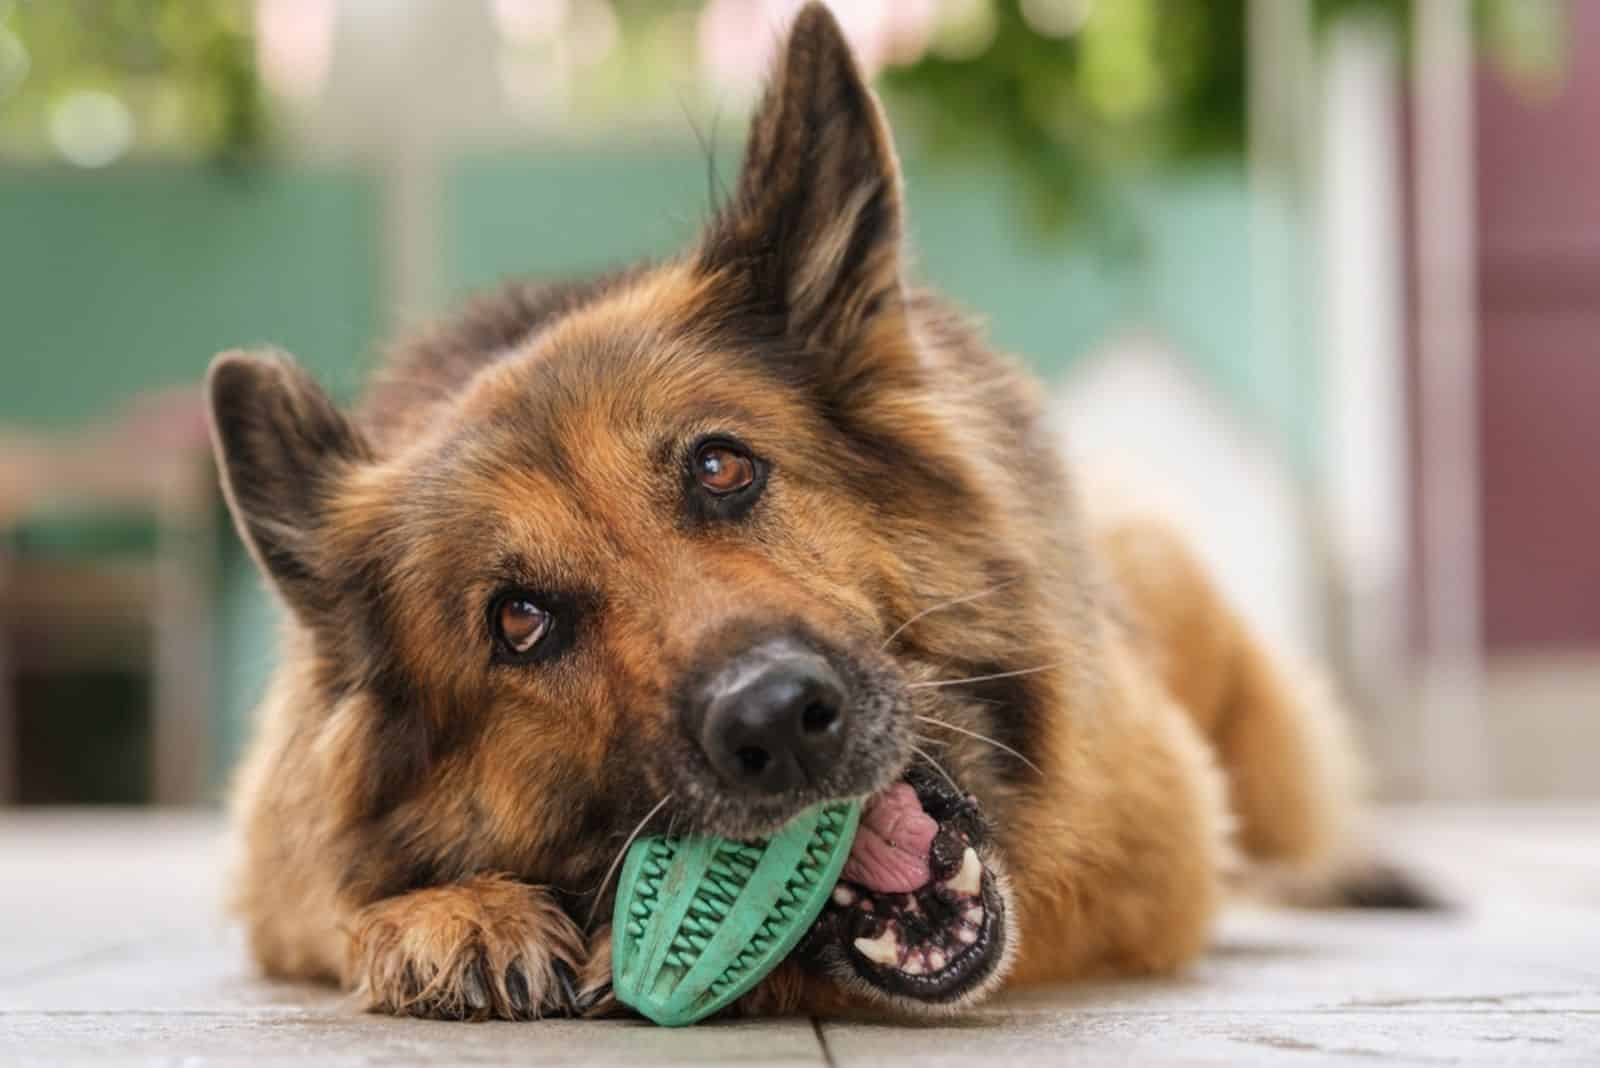 german shepherd dog holding toy in a mouth and chewing it